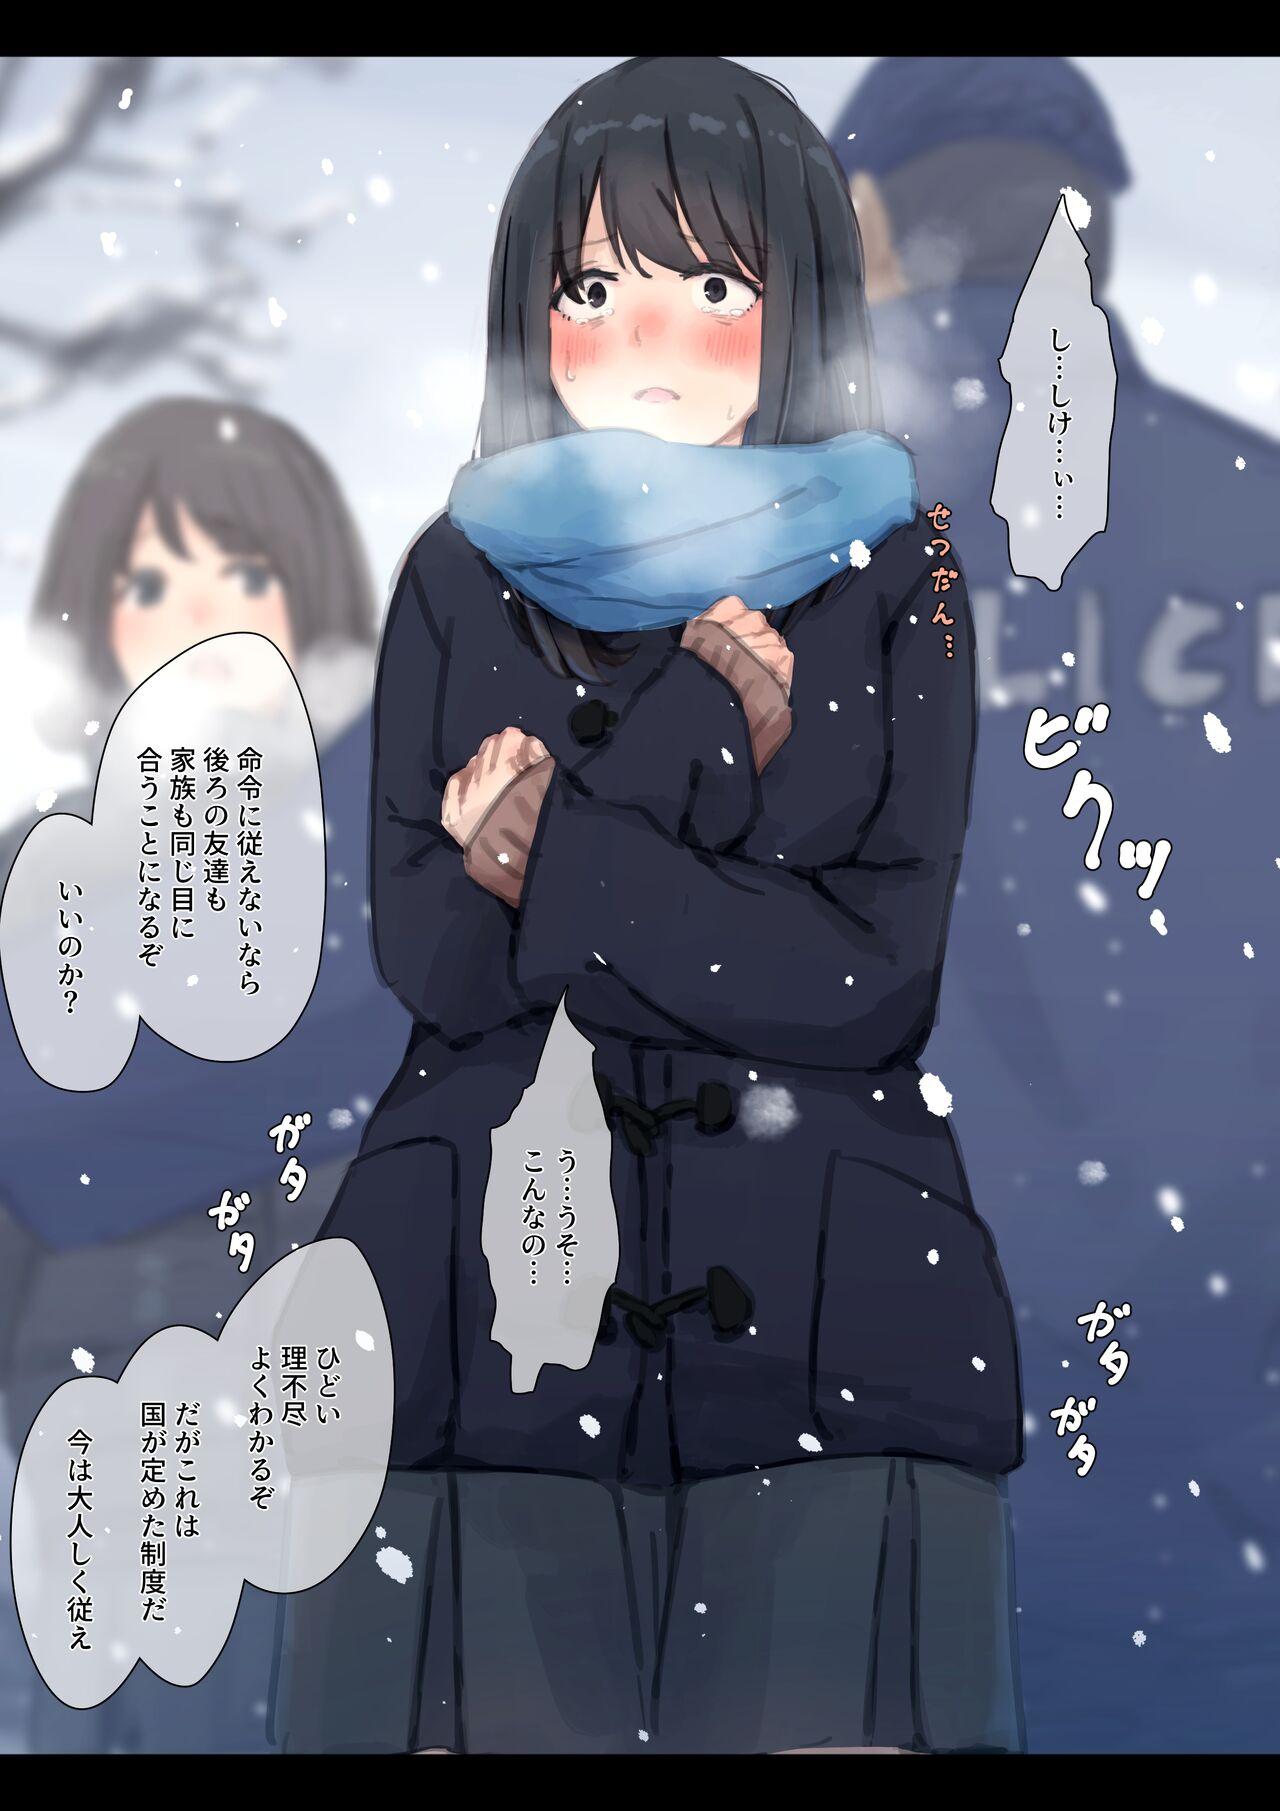 [Yukimuramaru] Public property Sex Slave Girl - Ex - Collection in the Snow - [Digital] [Ongoing] 19